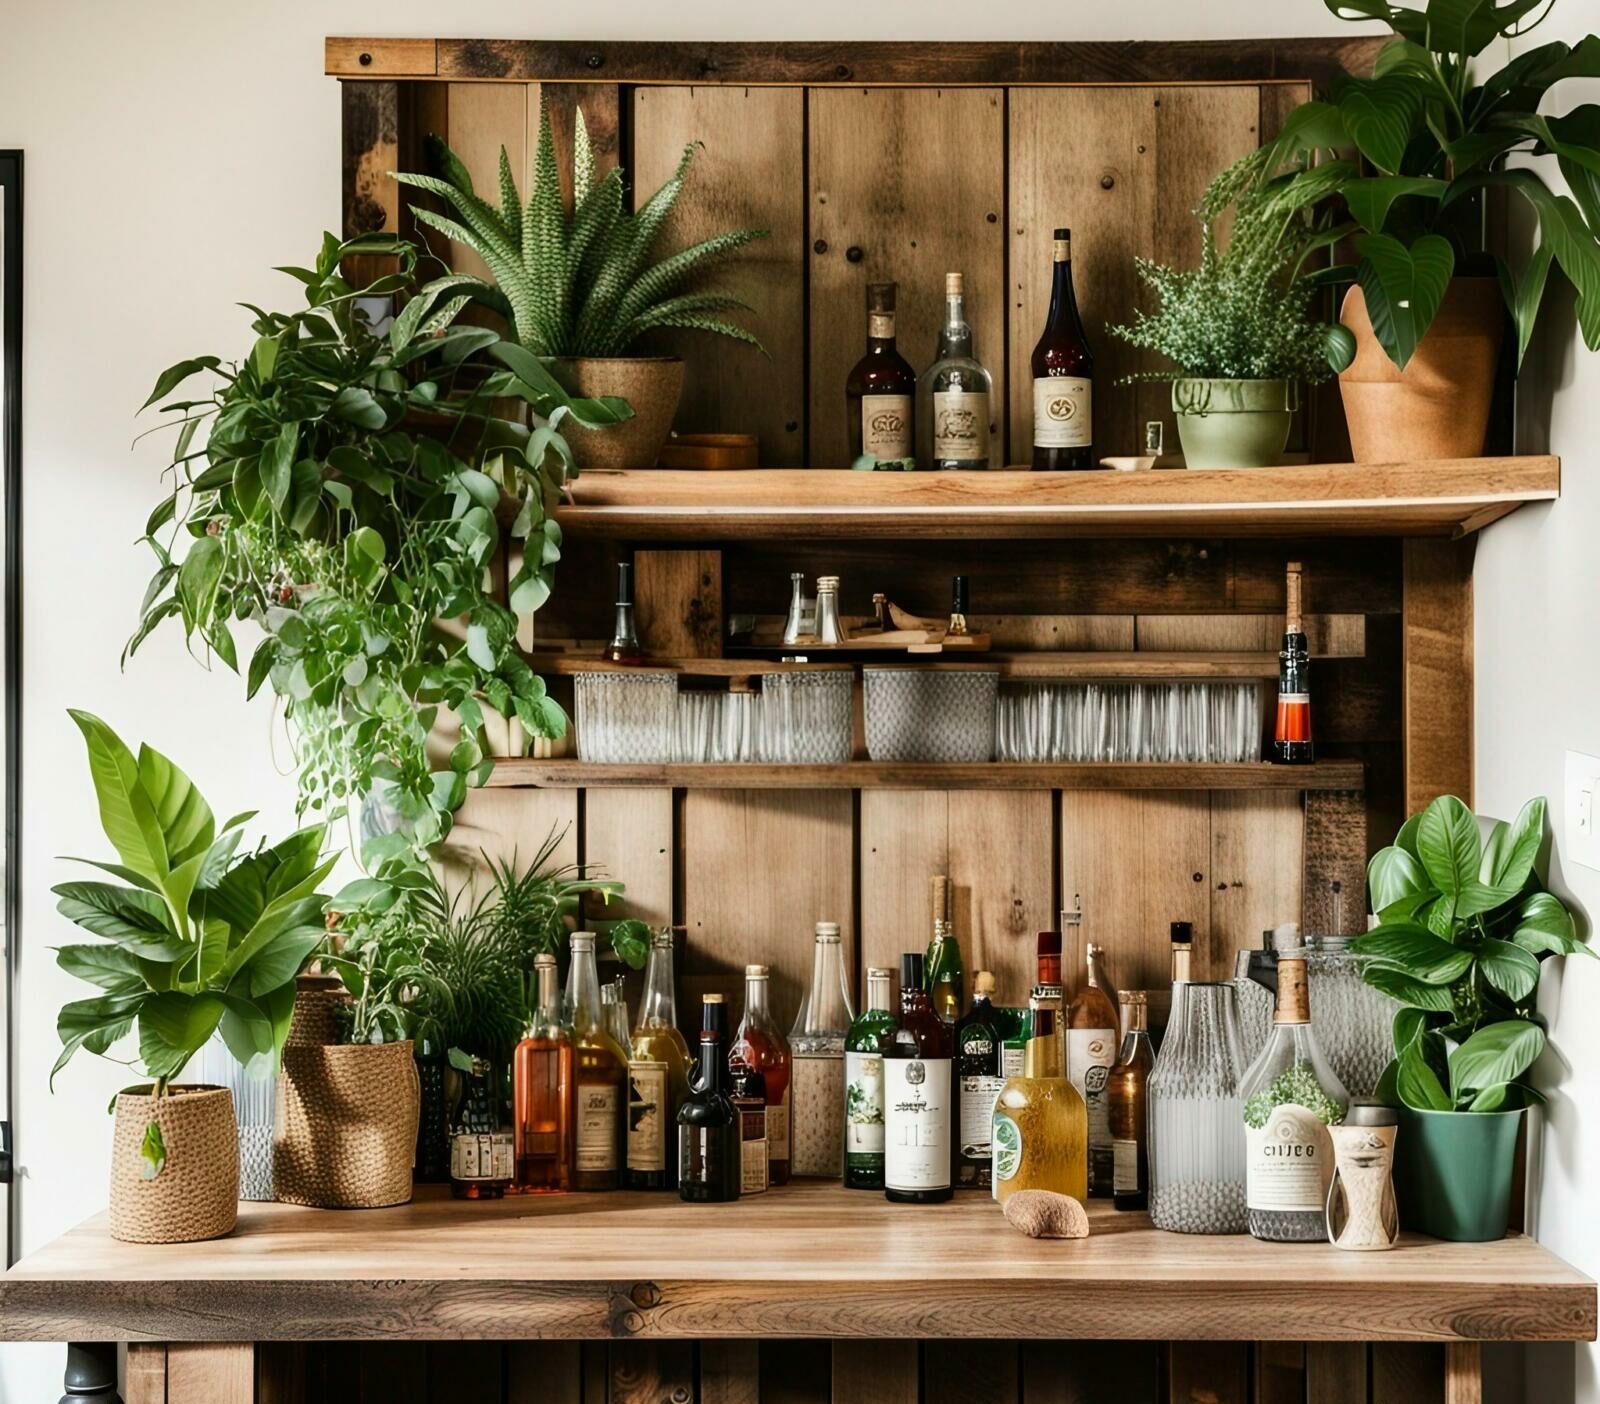 A home bar decorated with plants and bottles on a wooden shelf.